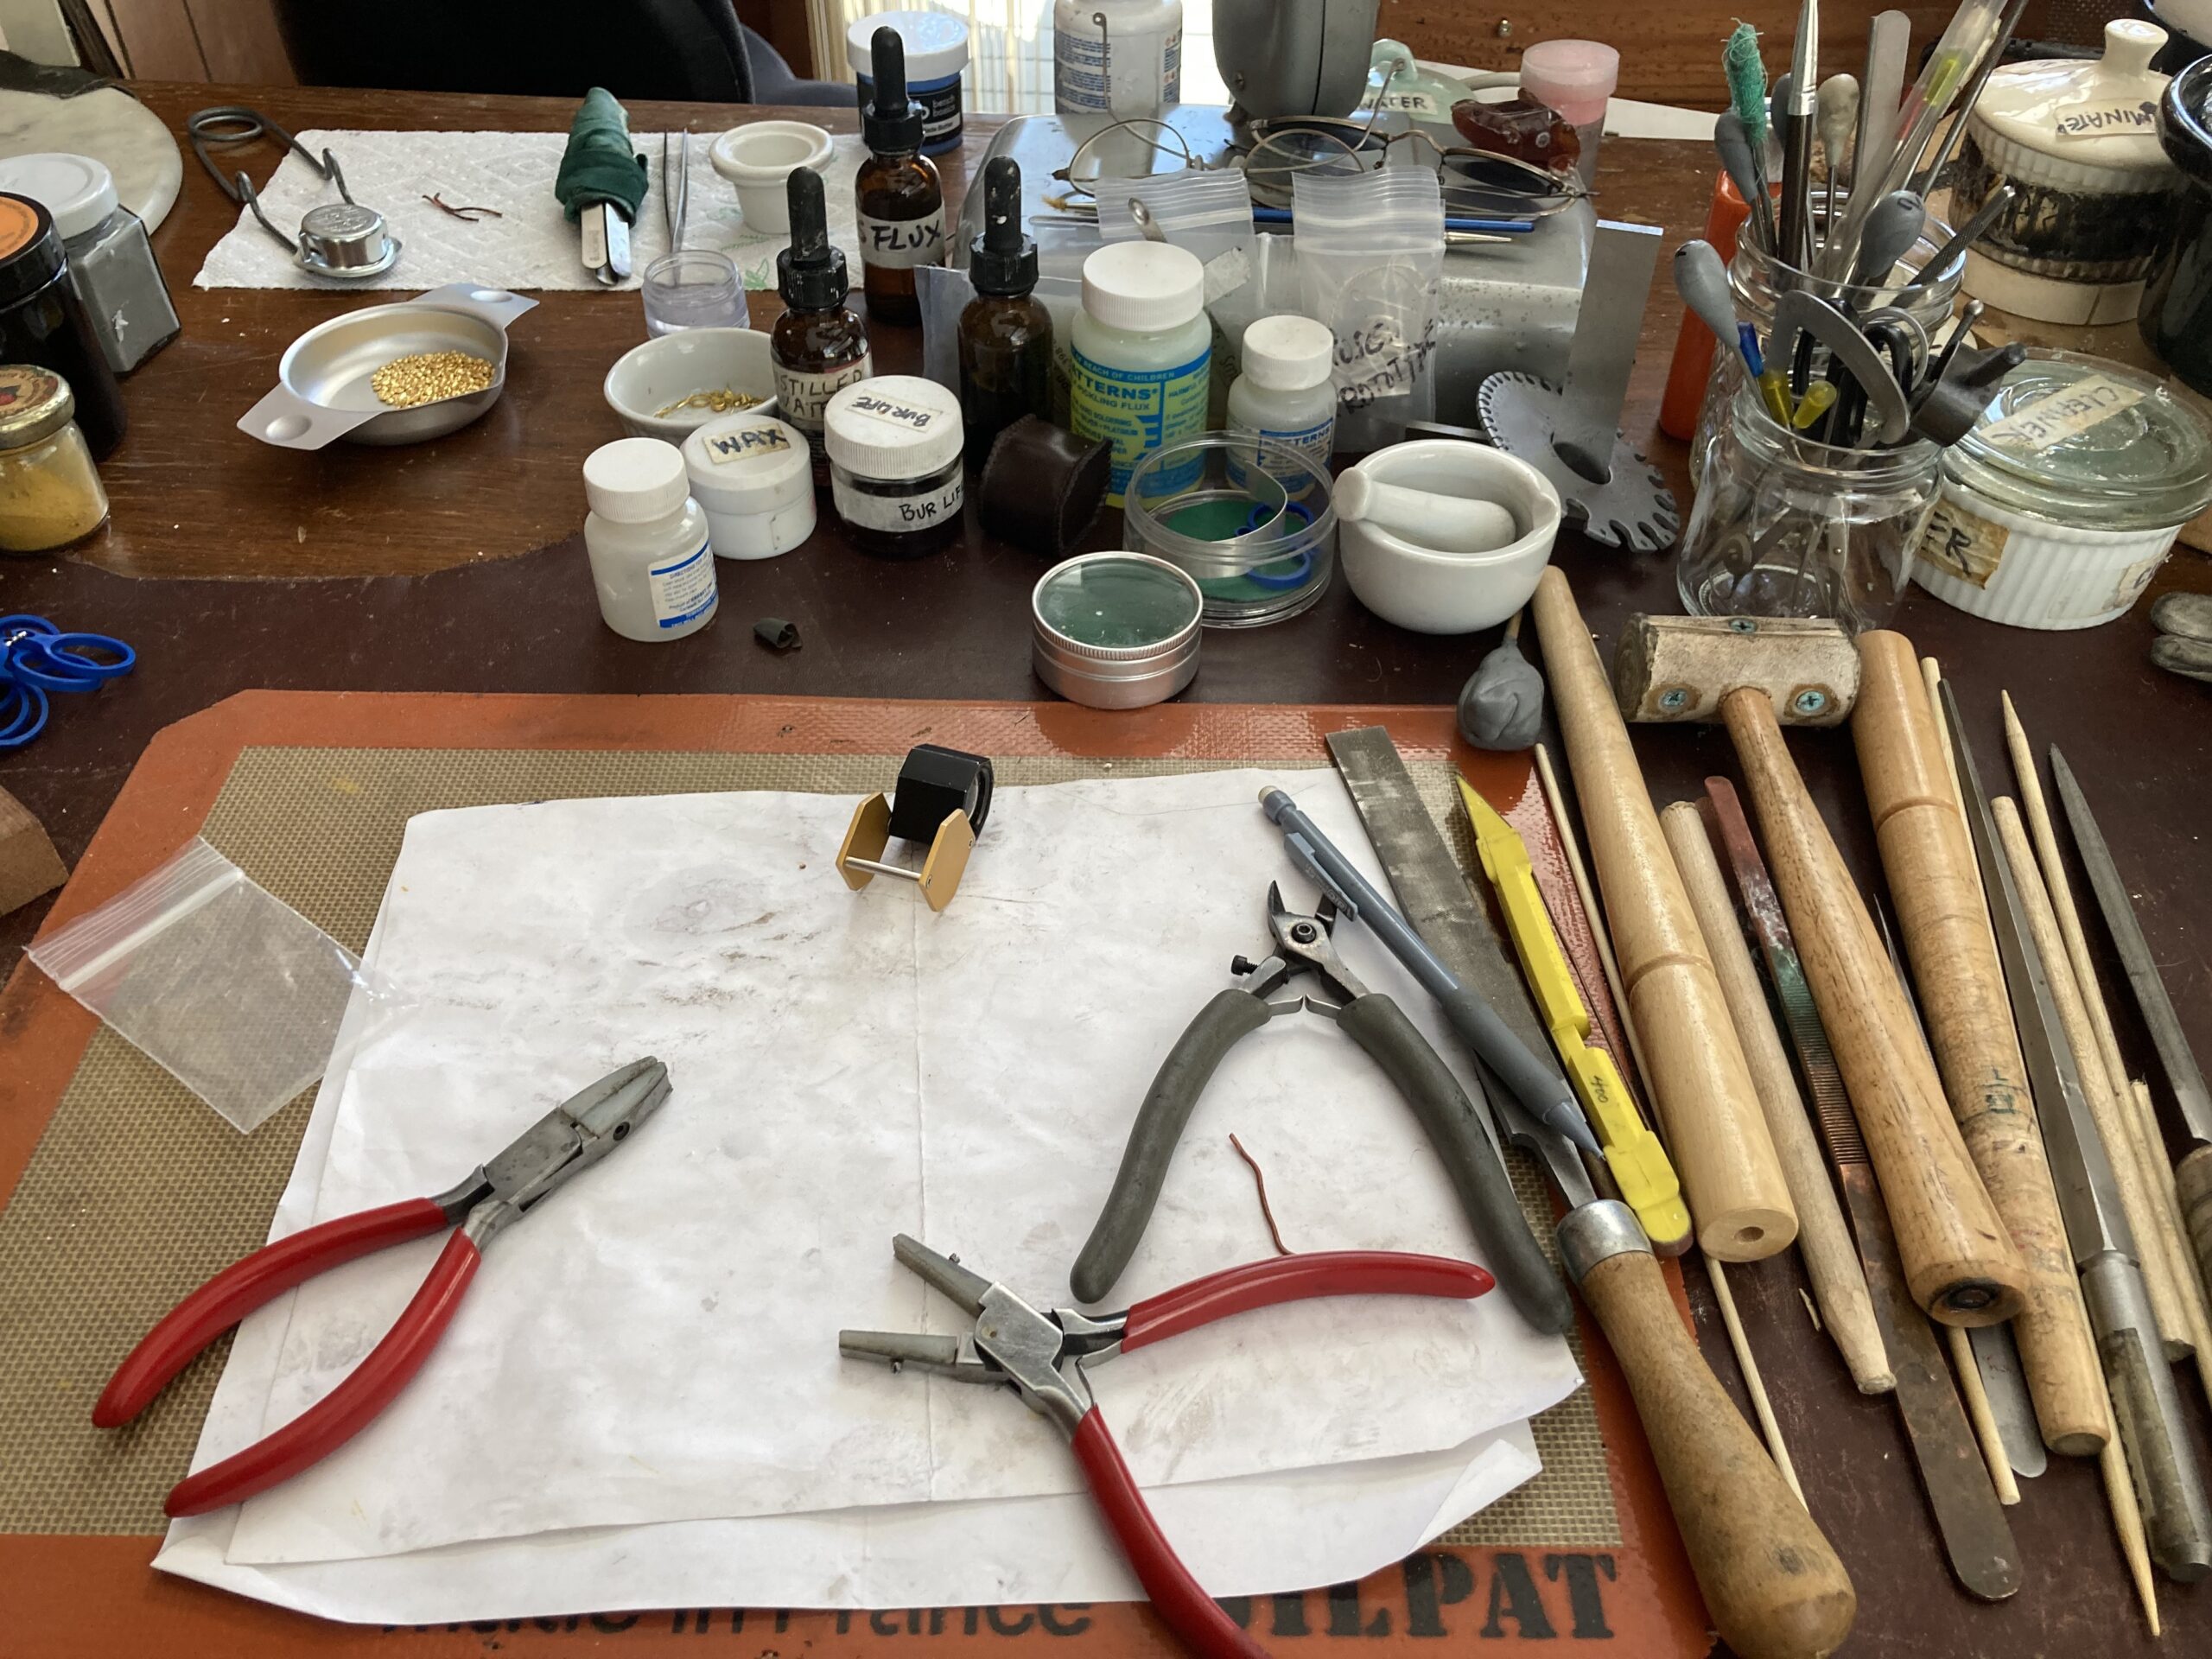 Tools ready to be put to use in Lois Gore's workspace.